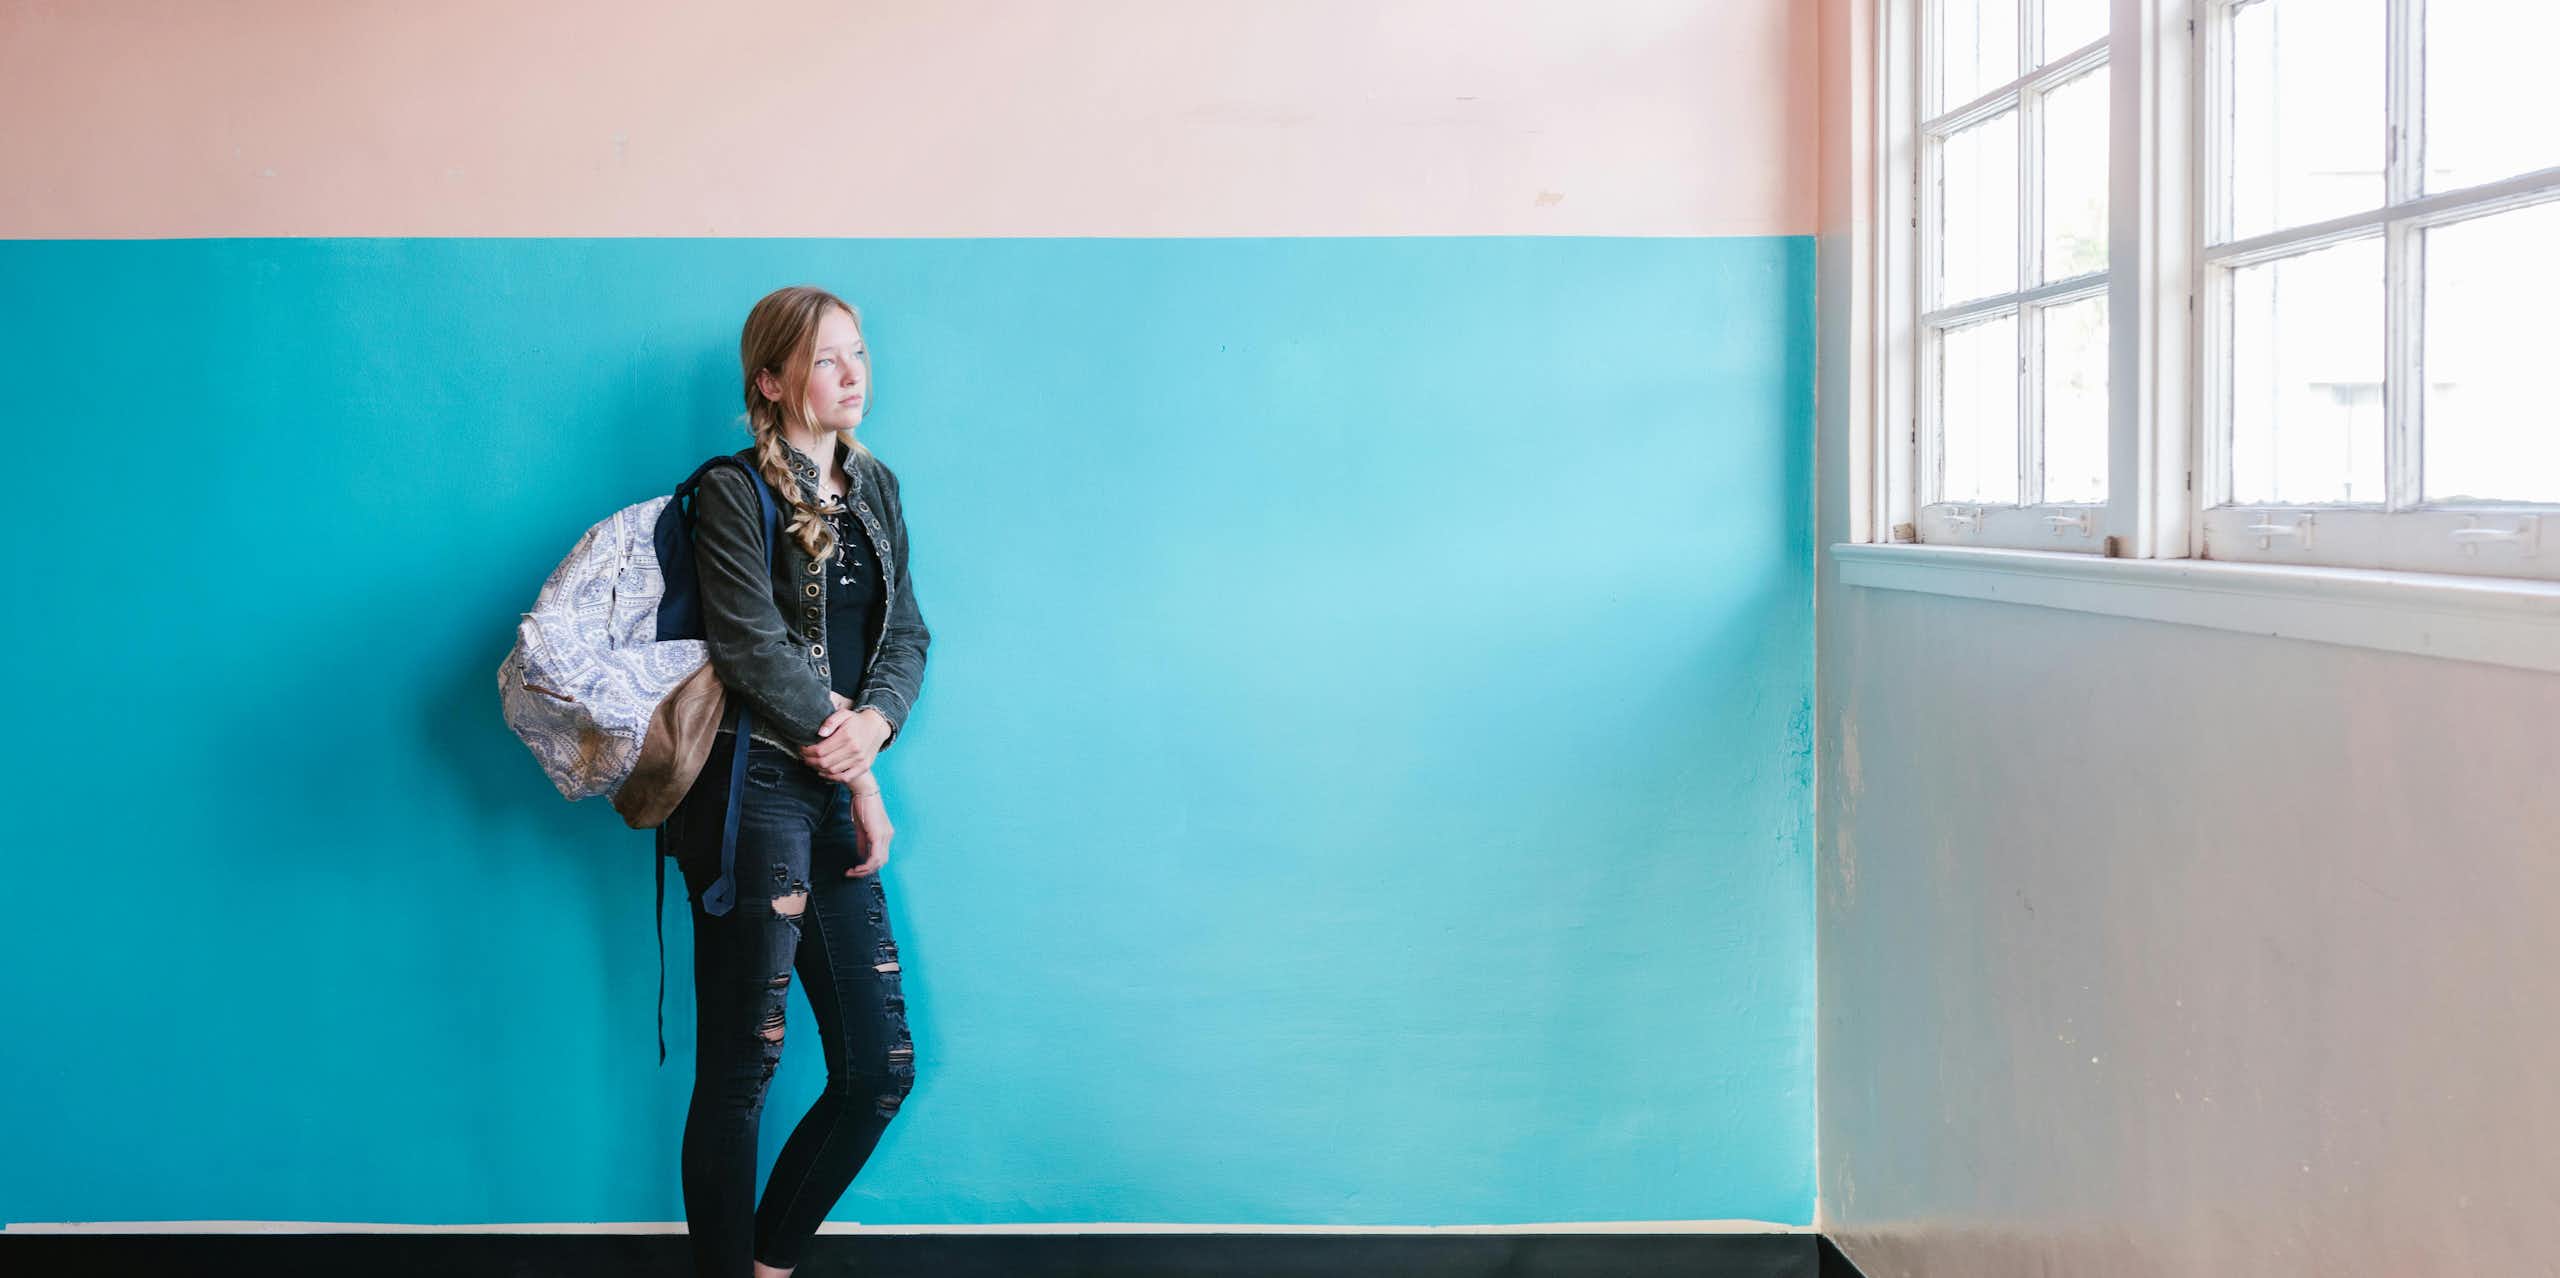 A young woman in jeans and a backpack leans against a blue and pink painted wall. She looks out of a large window. 